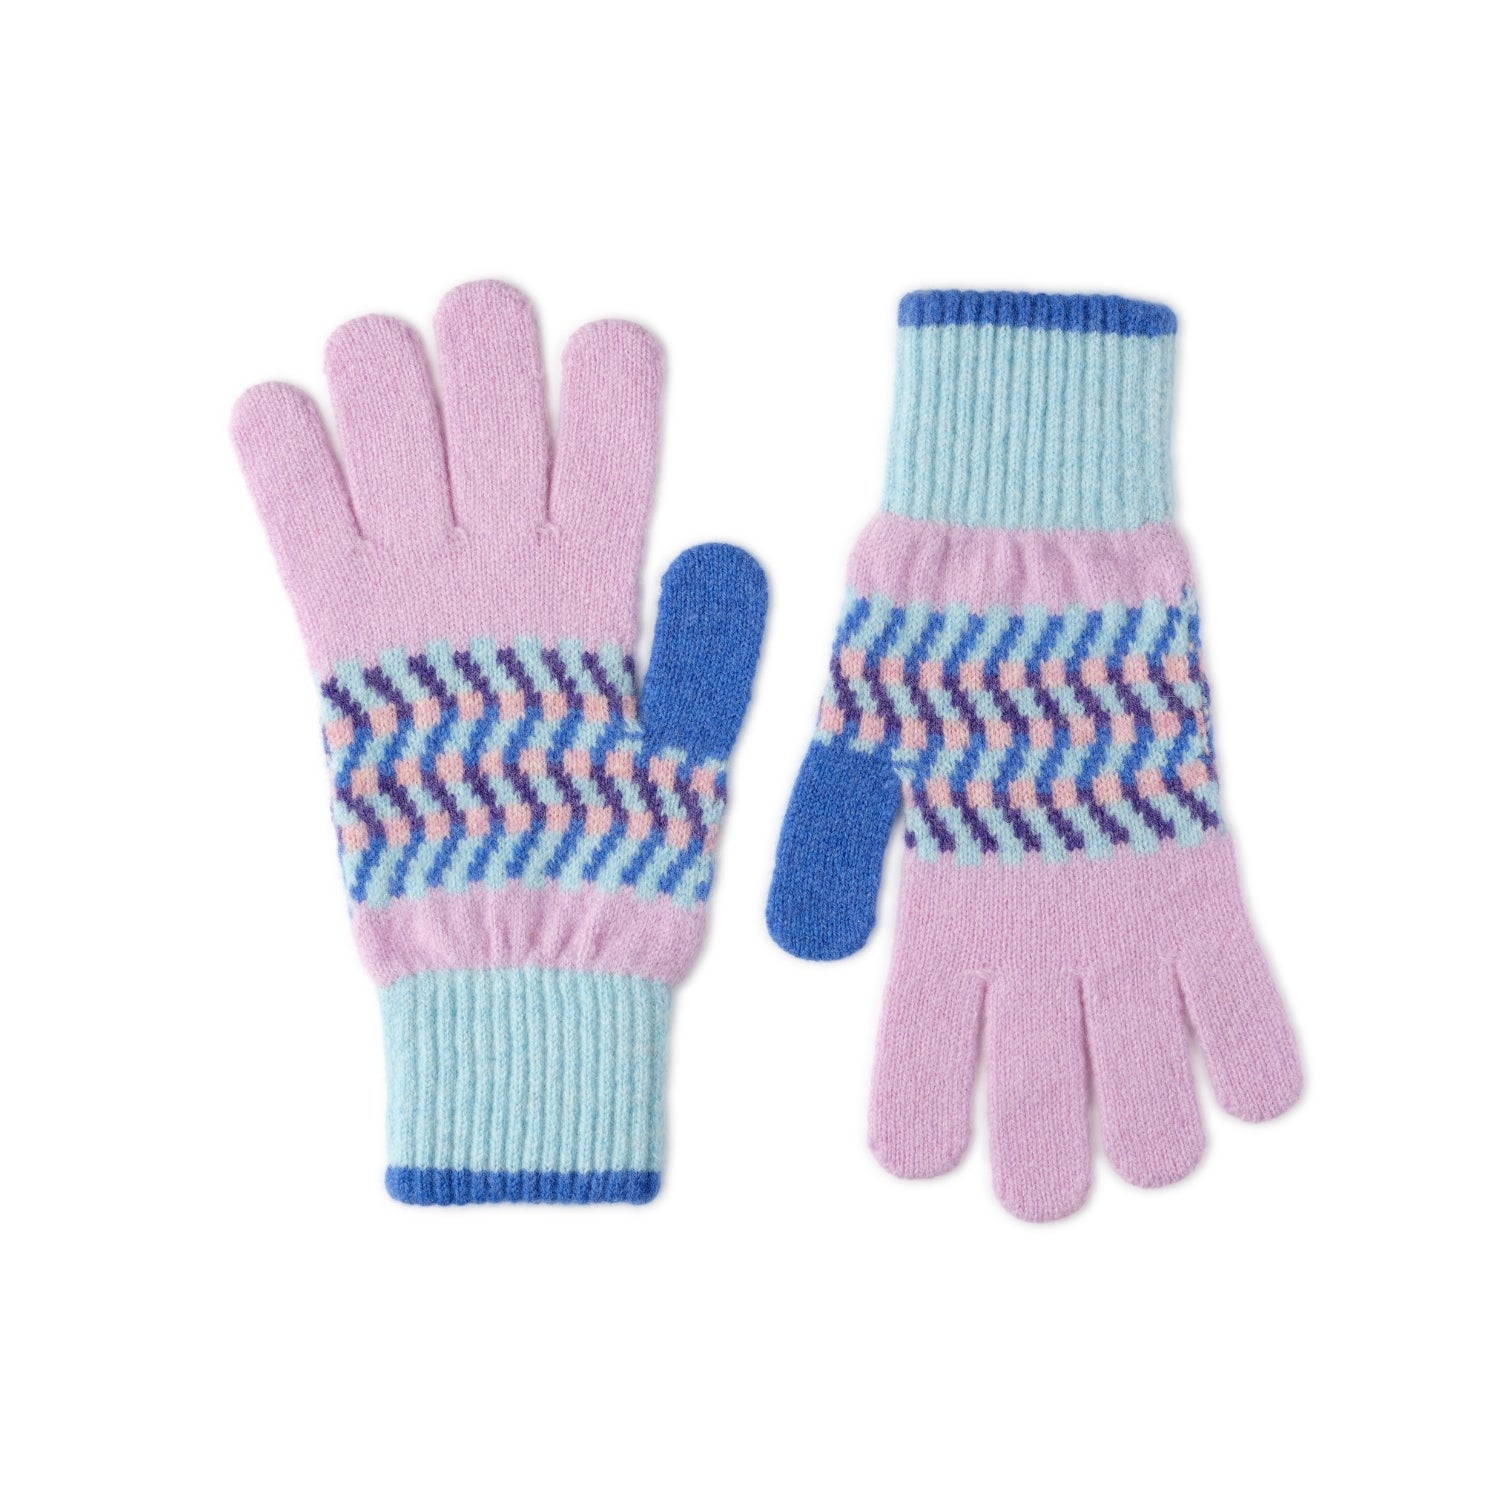 womens wool gloves in contemporary design - blue